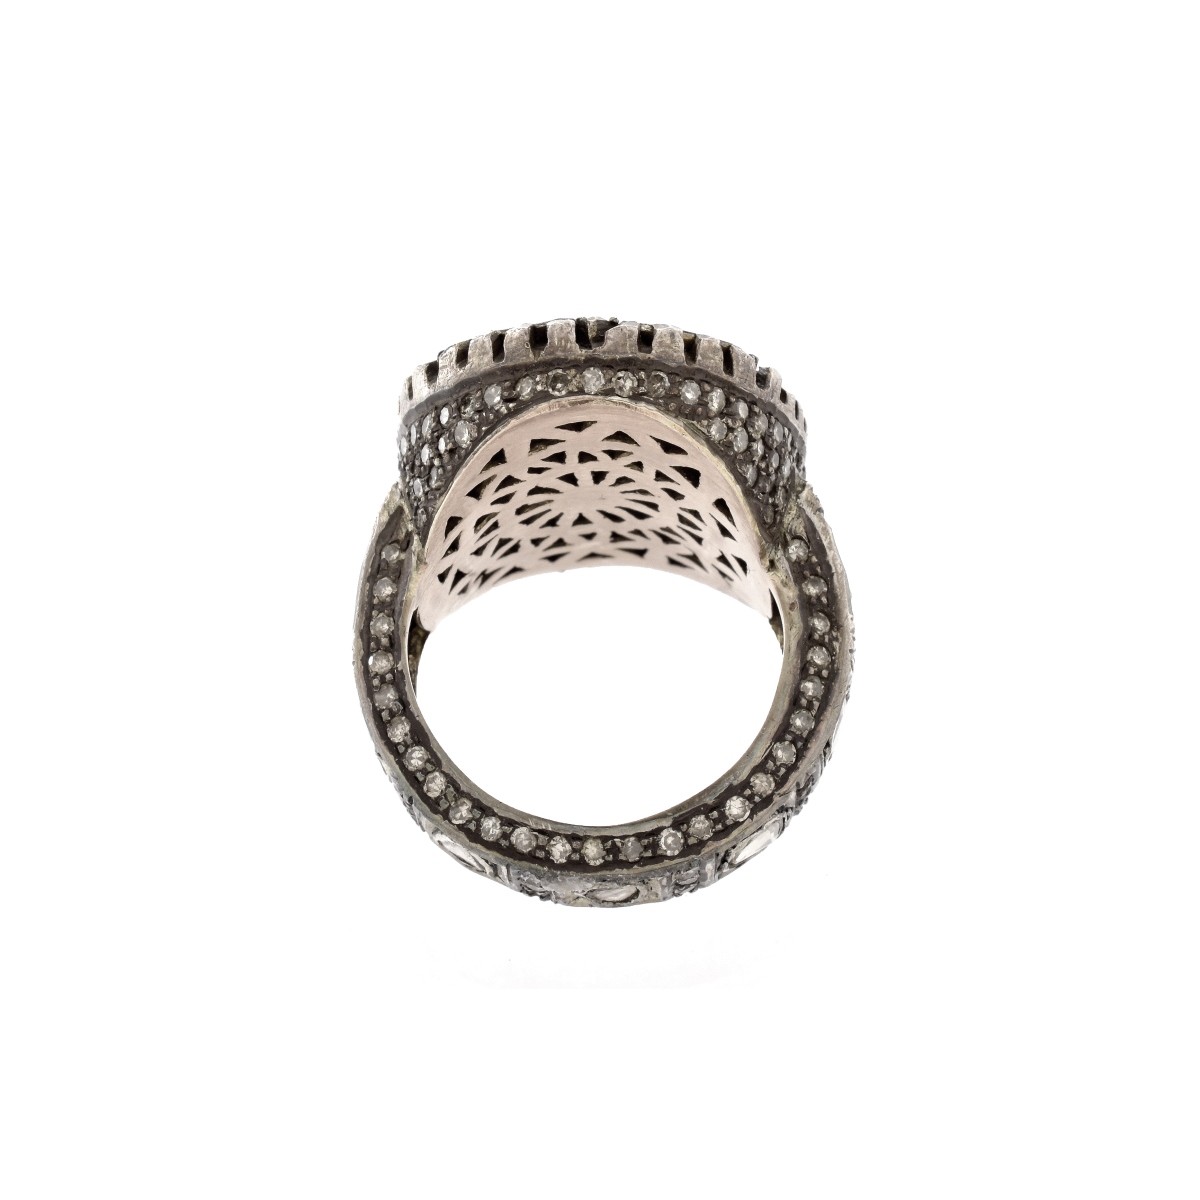 Antique Diamond and Silver Ring